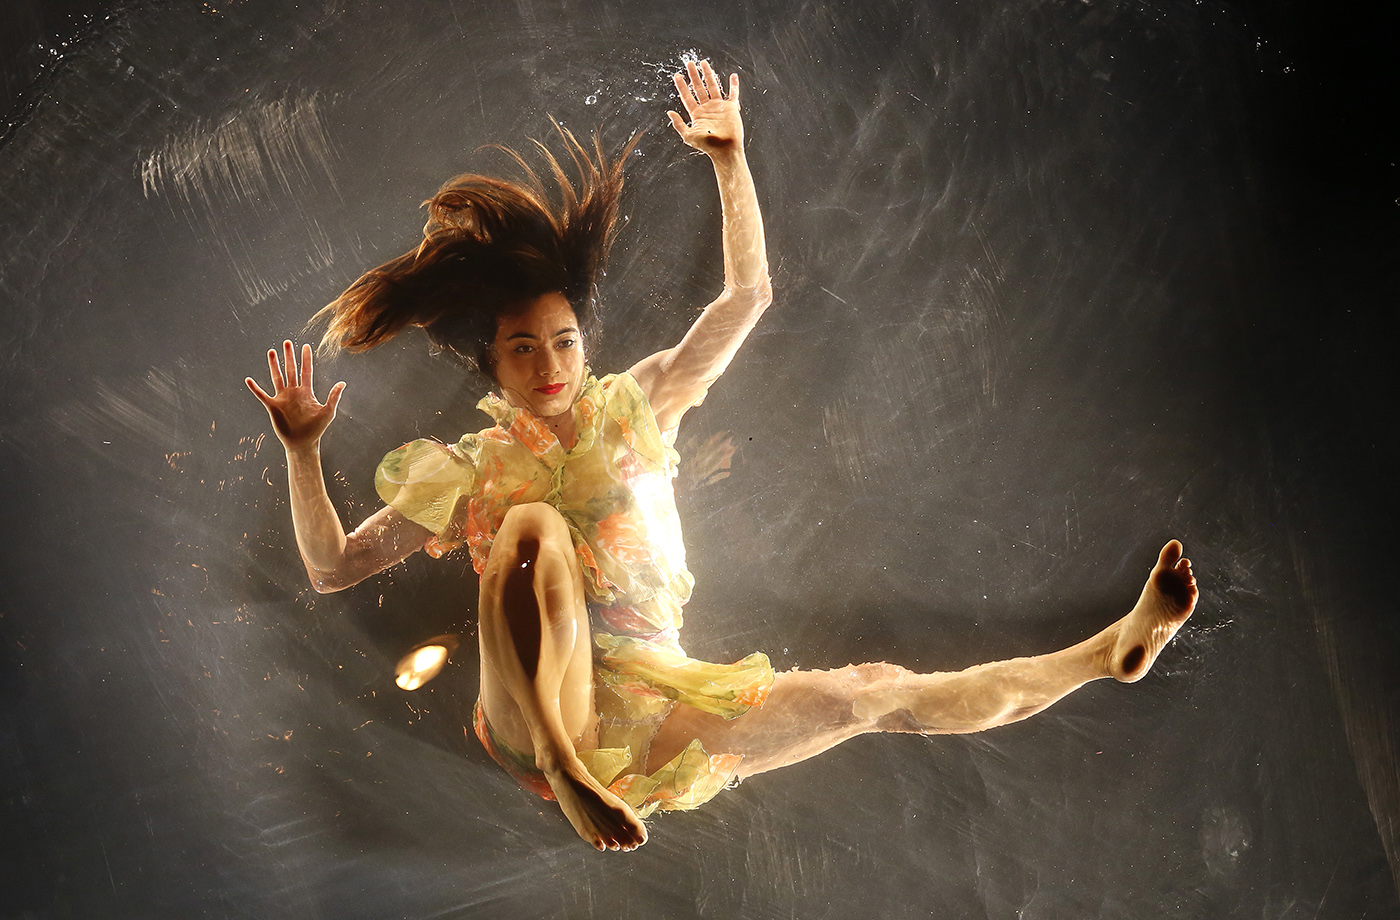 A dancer performs on a watery stage suspended above the audience during the Fuerza Bruta (Brute Force) show in Istanbul, Turkey, 16 November 2016